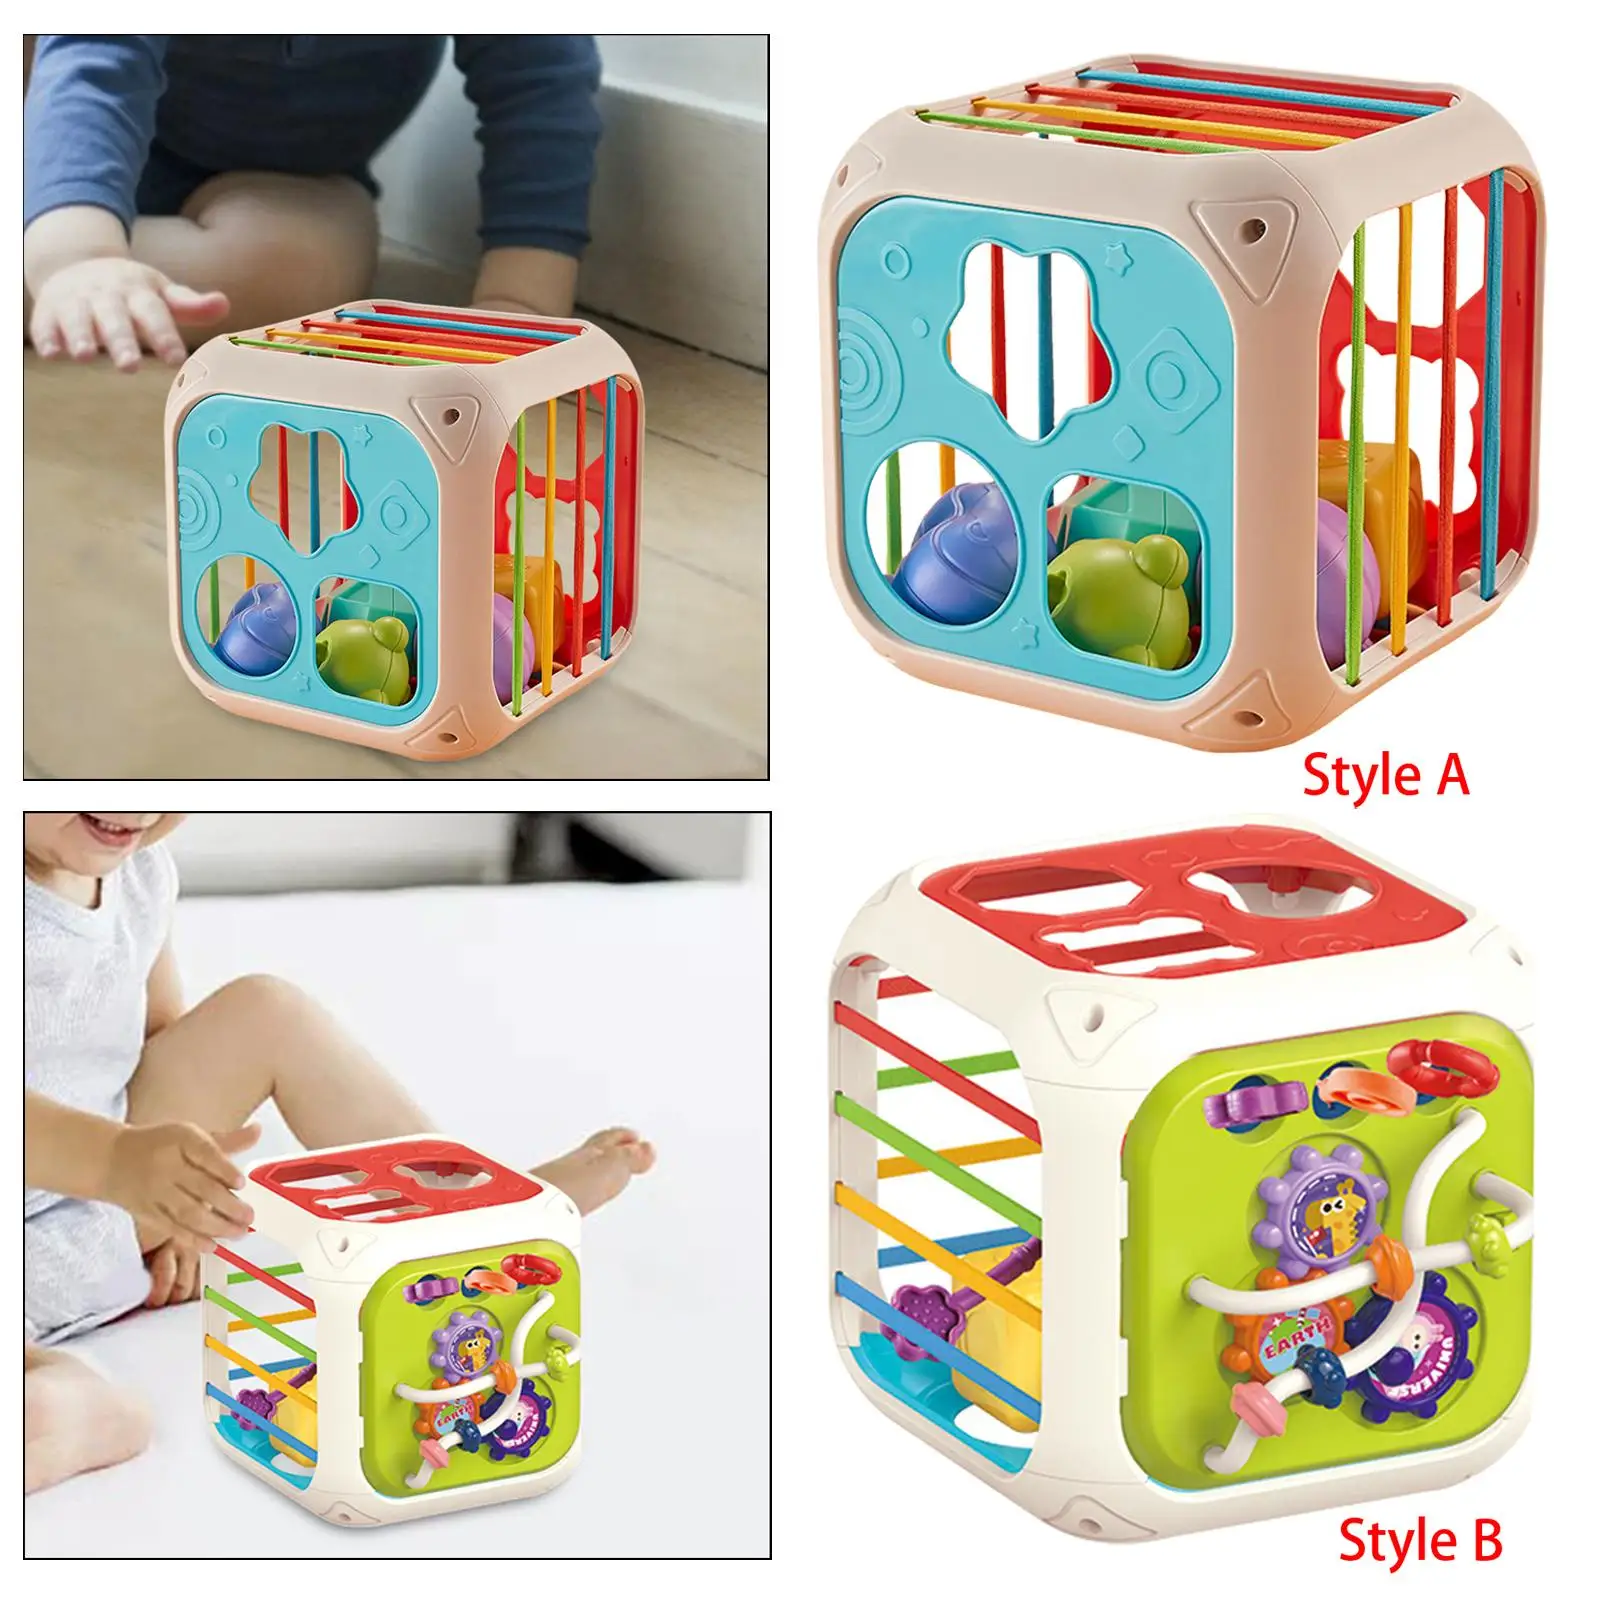 Montessori Baby Shape Sorter Toys Early Developmental with Elastic Bands Color Recognition for Children Baby Birthday Gift Kids